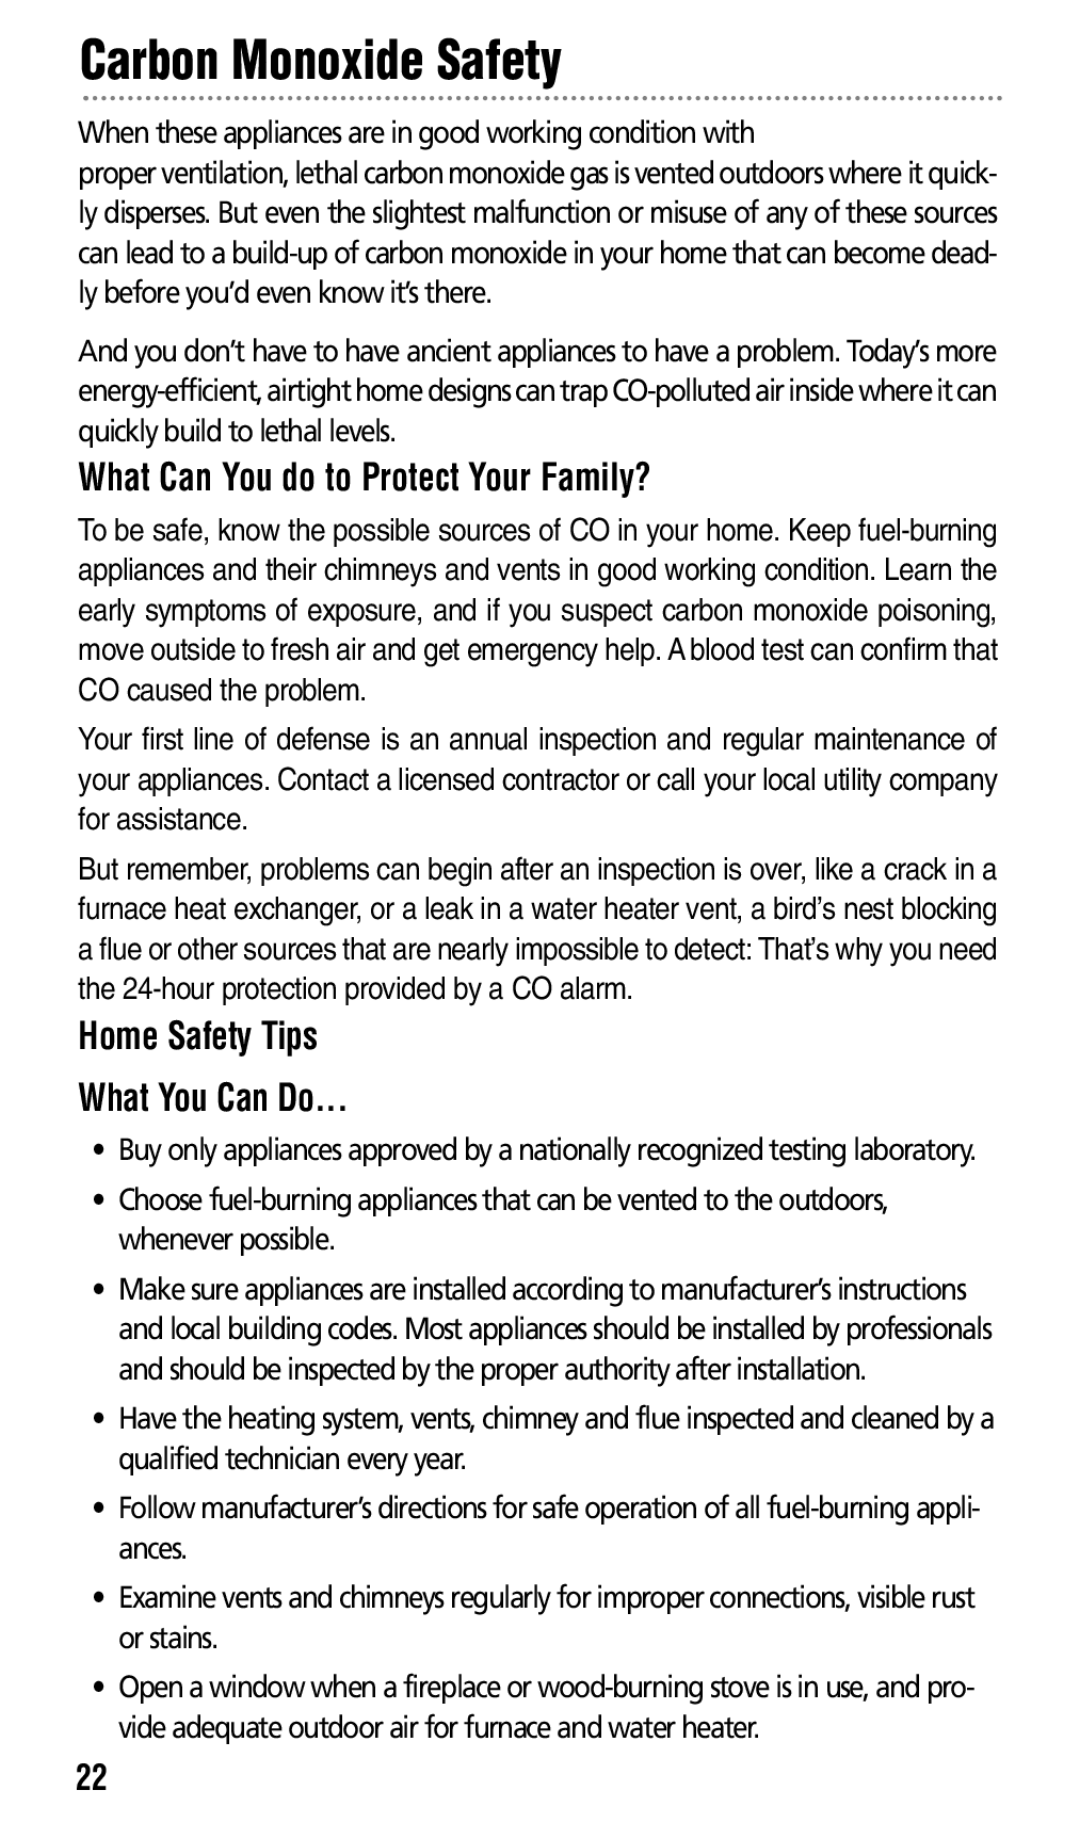 Kidde KN-COPP-3 manual What Can You do to Protect Your Family?, Home Safety Tips What You Can Do 